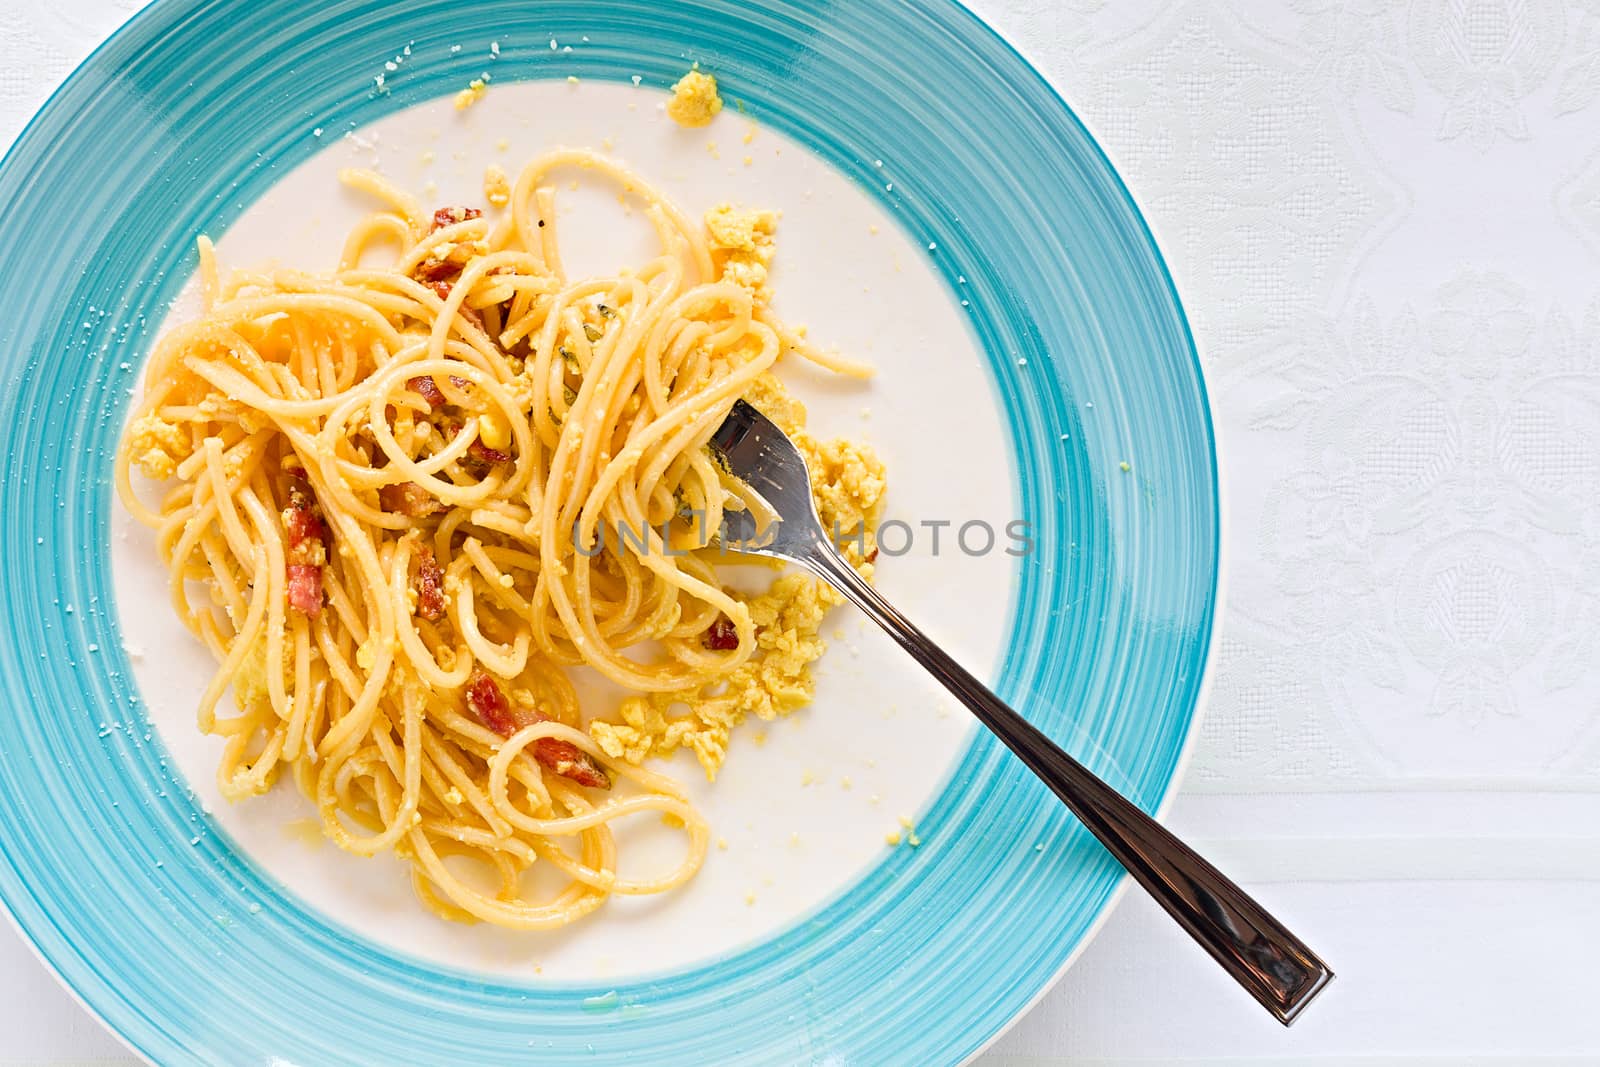 Closeup of eaten spaghetti carbonara with egg, smoked bacon and cheese over a table seen from above